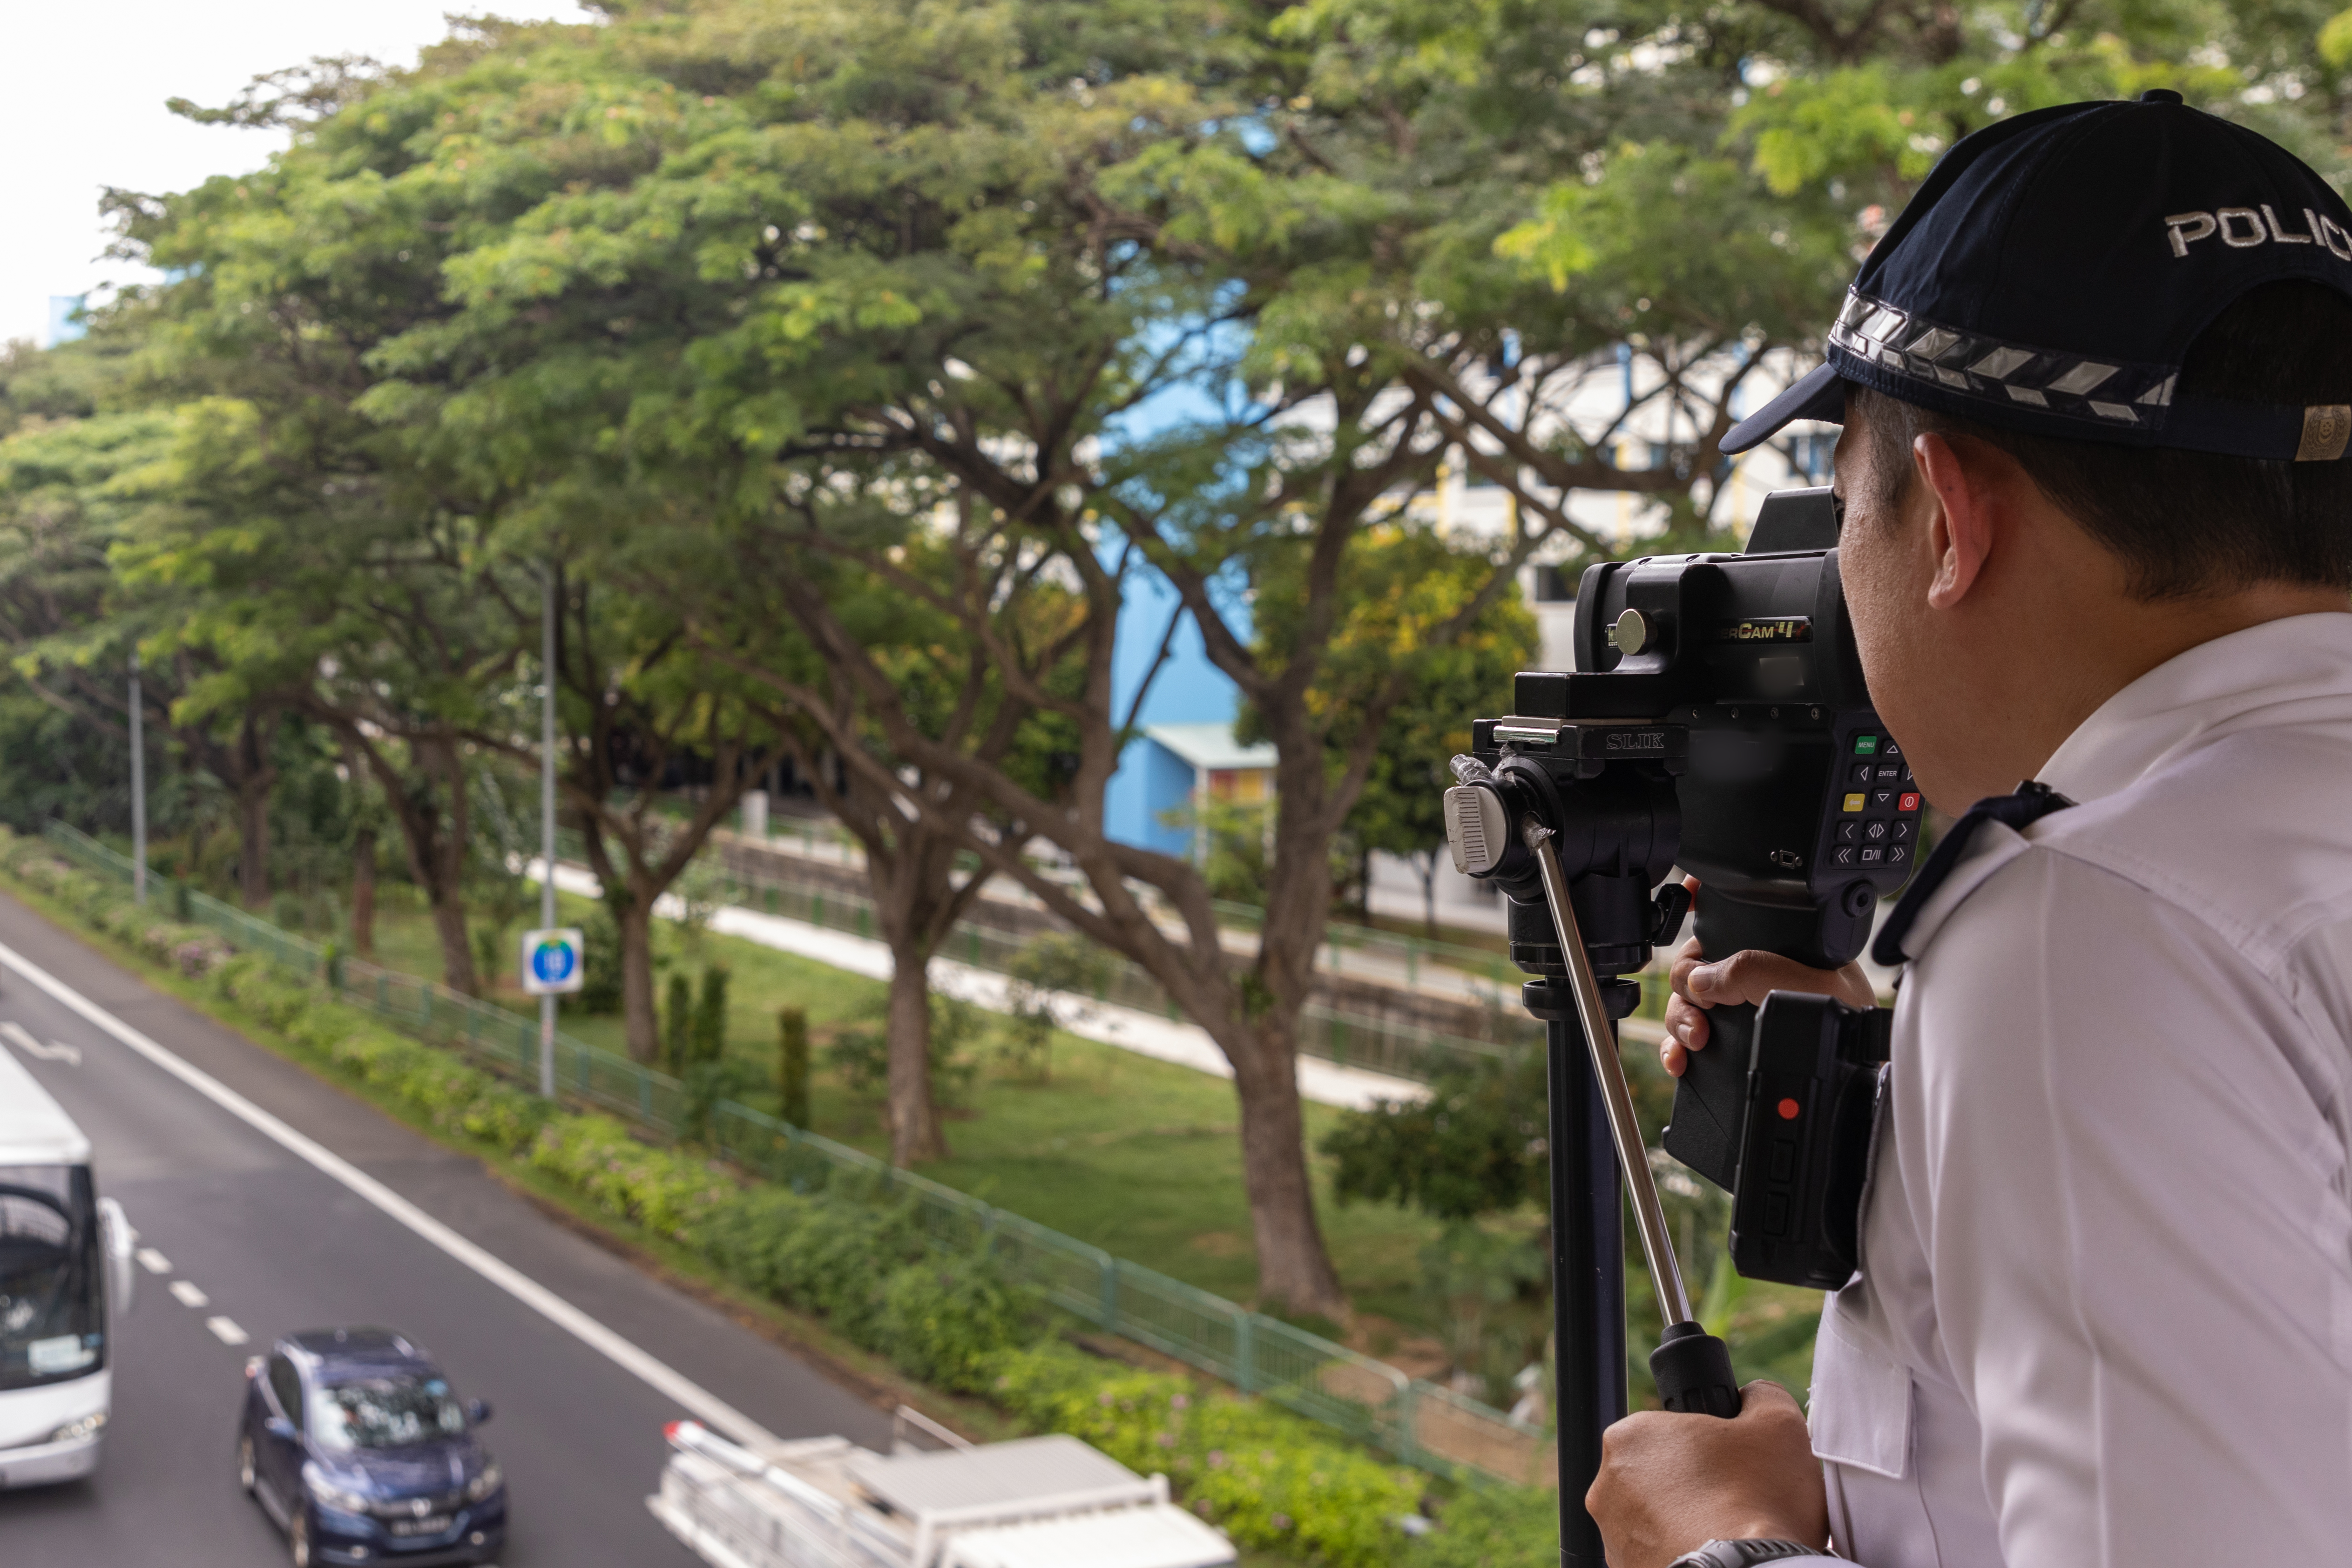 A Traffic Police officer using an enforcement camera to capture speeding vehicles from overhead bridge